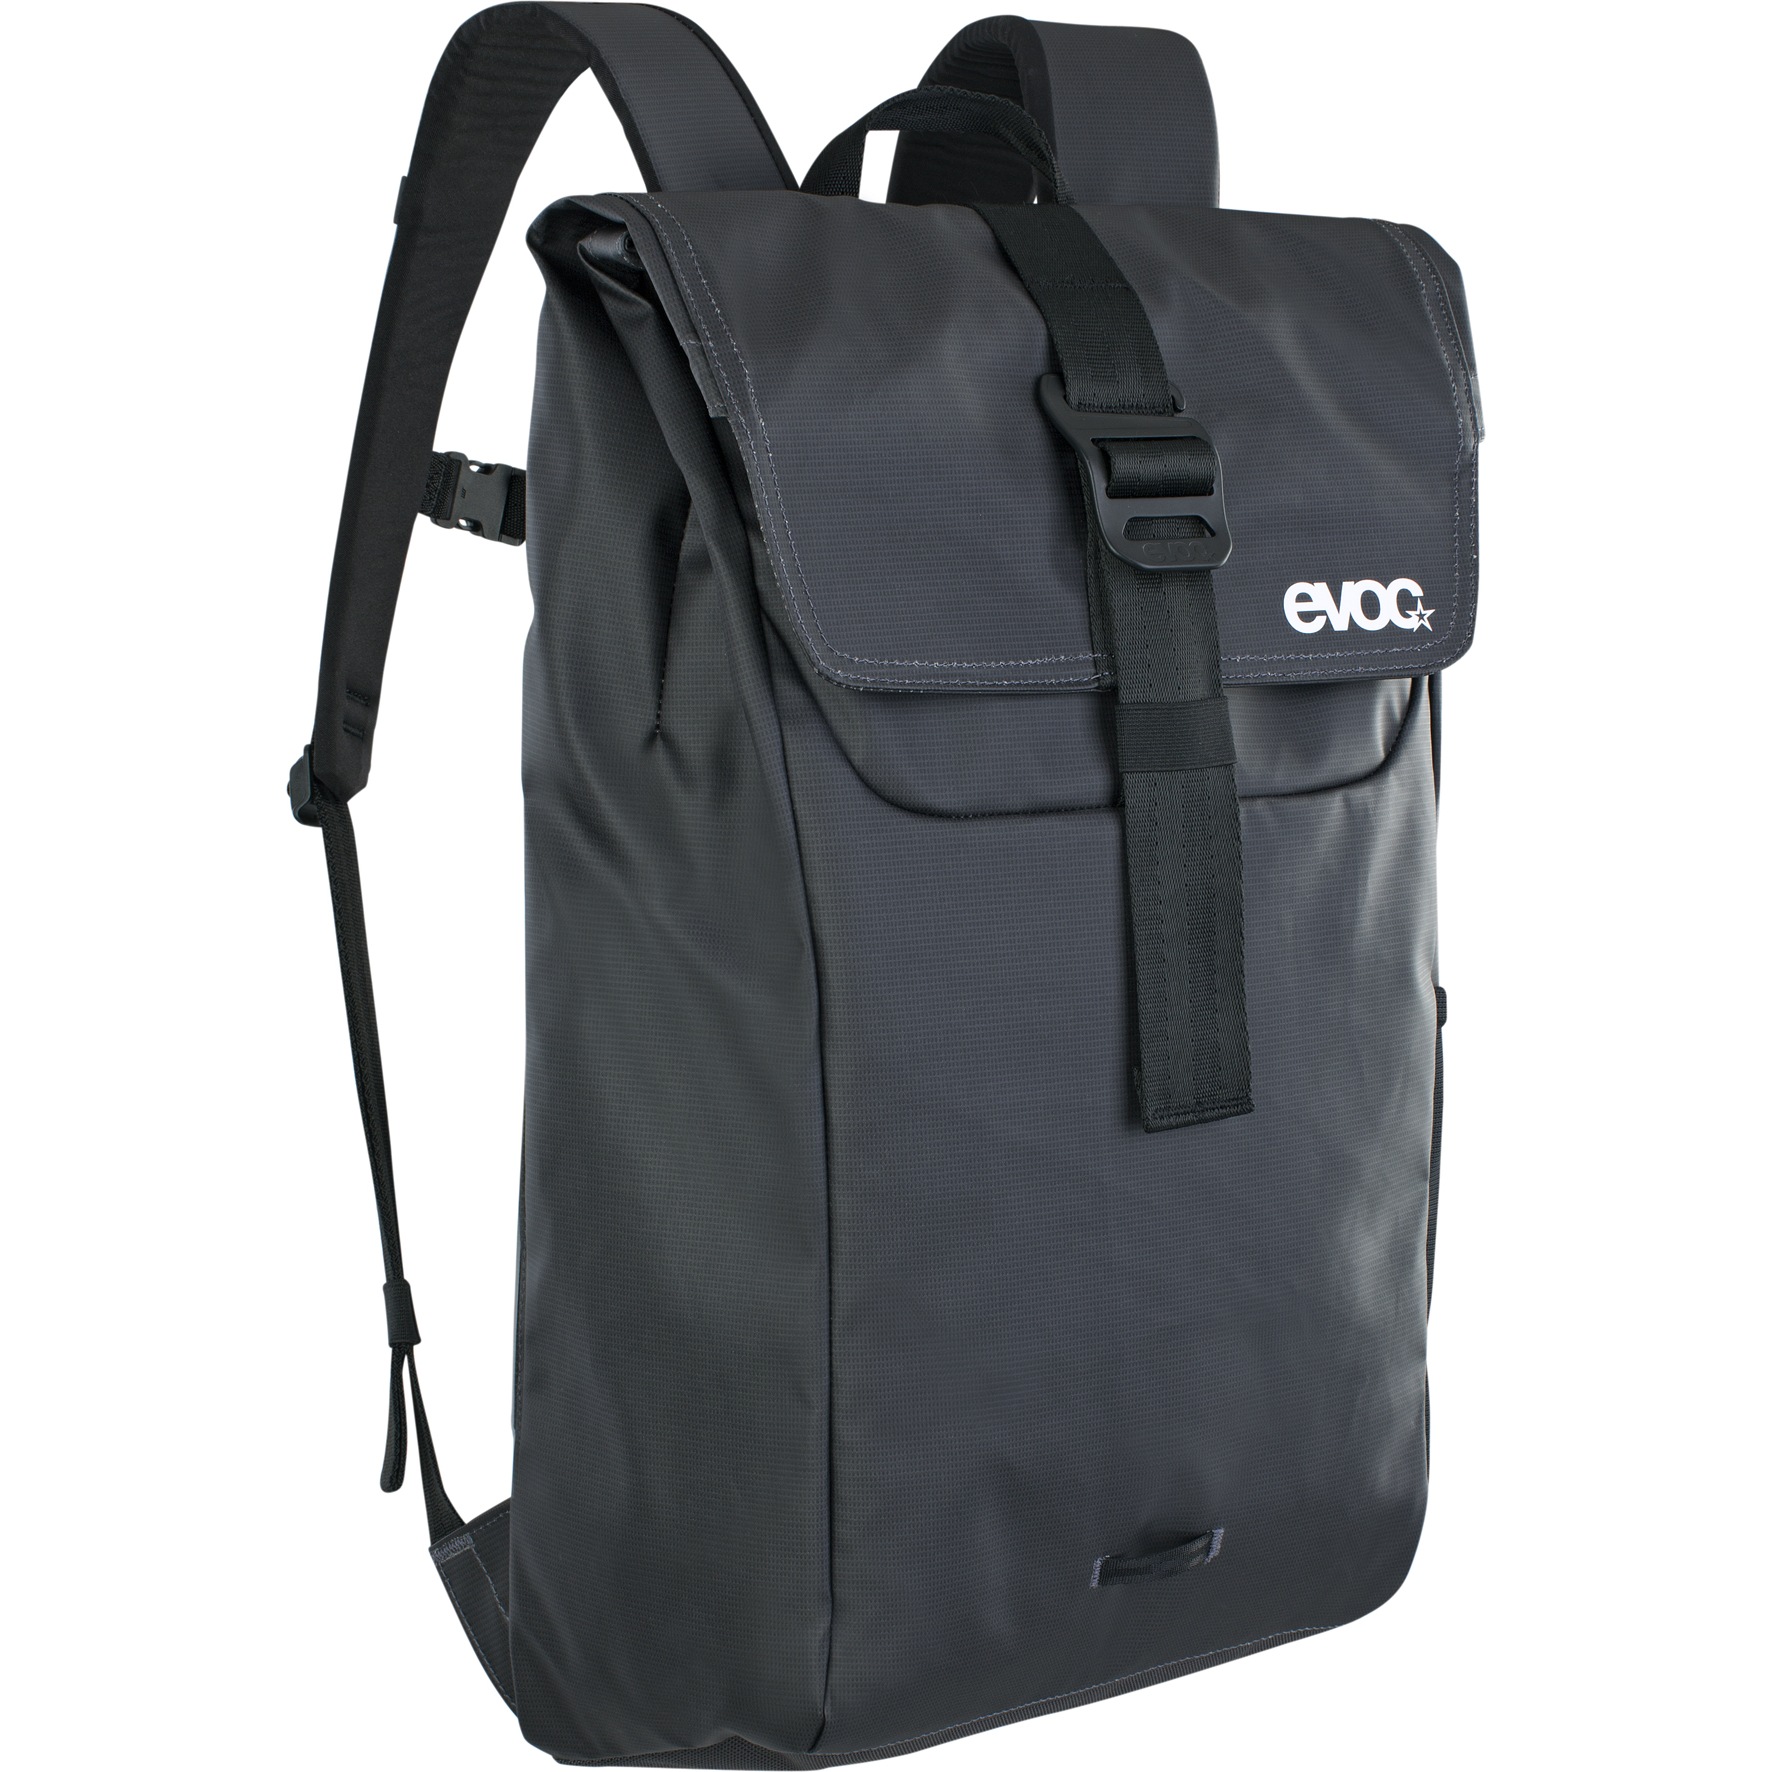 Picture of EVOC Duffle Backpack 16L - Carbon Grey/Black